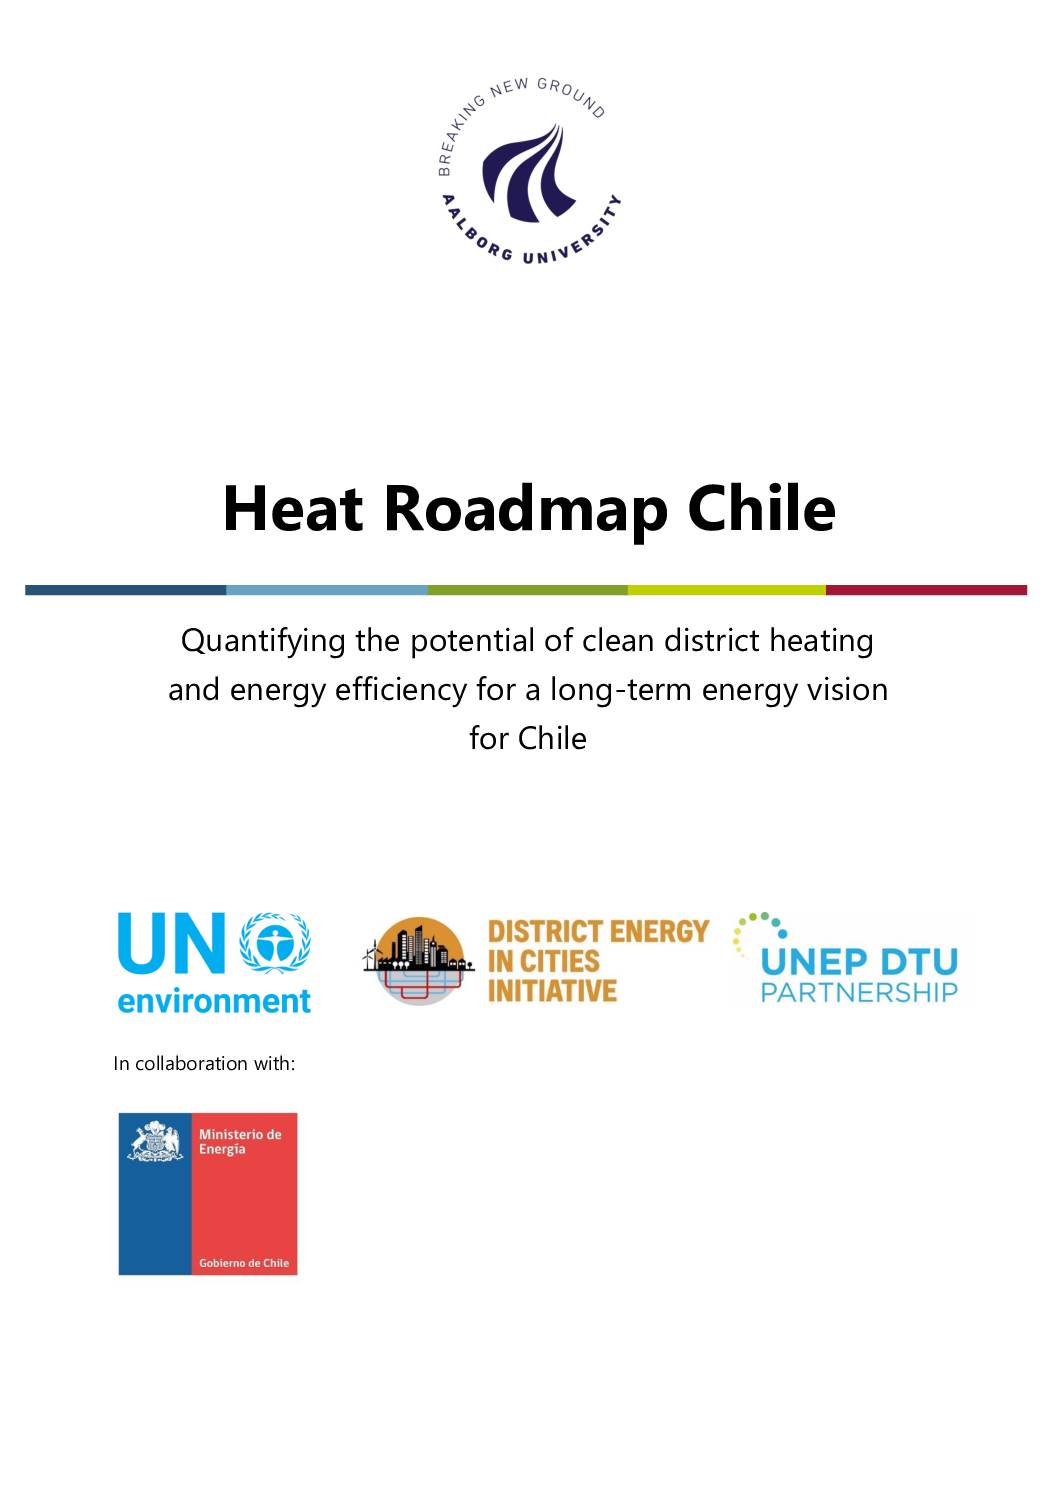 Heat Roadmap Chile; Quantifying the potential of clean district heating and energy efficiency for a long-term energy vision for Chile